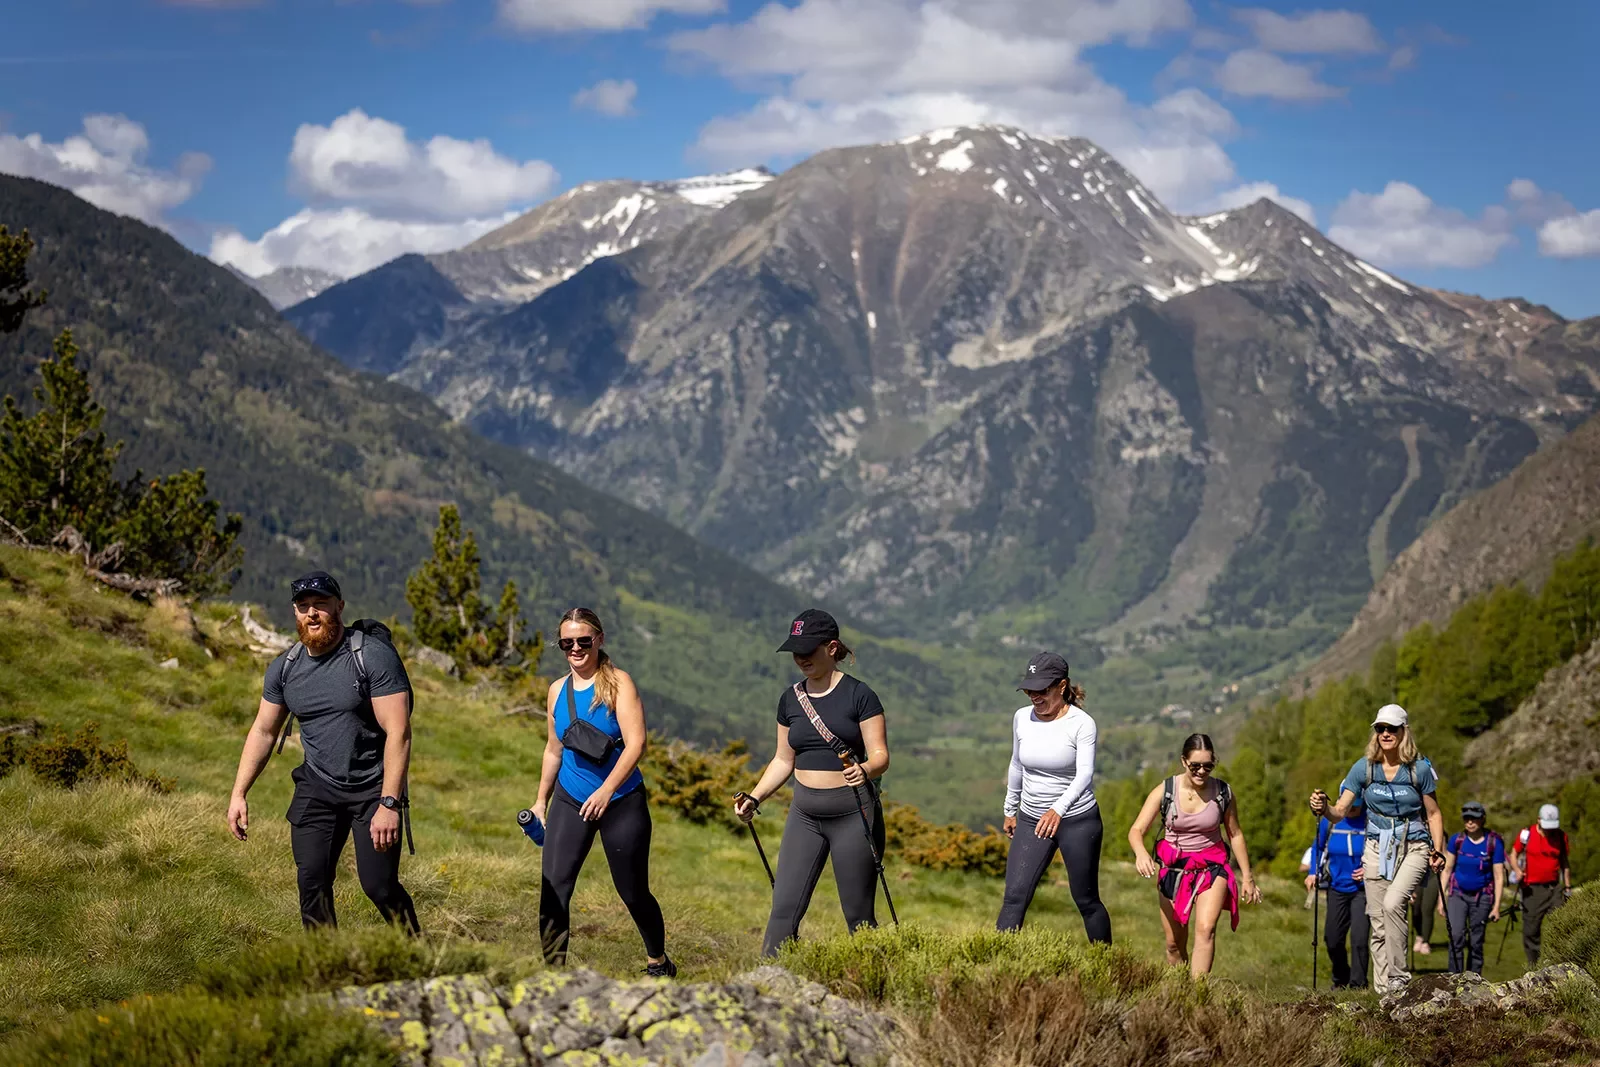 Group of young hikers climbing a grassy hill with large mountains in the background